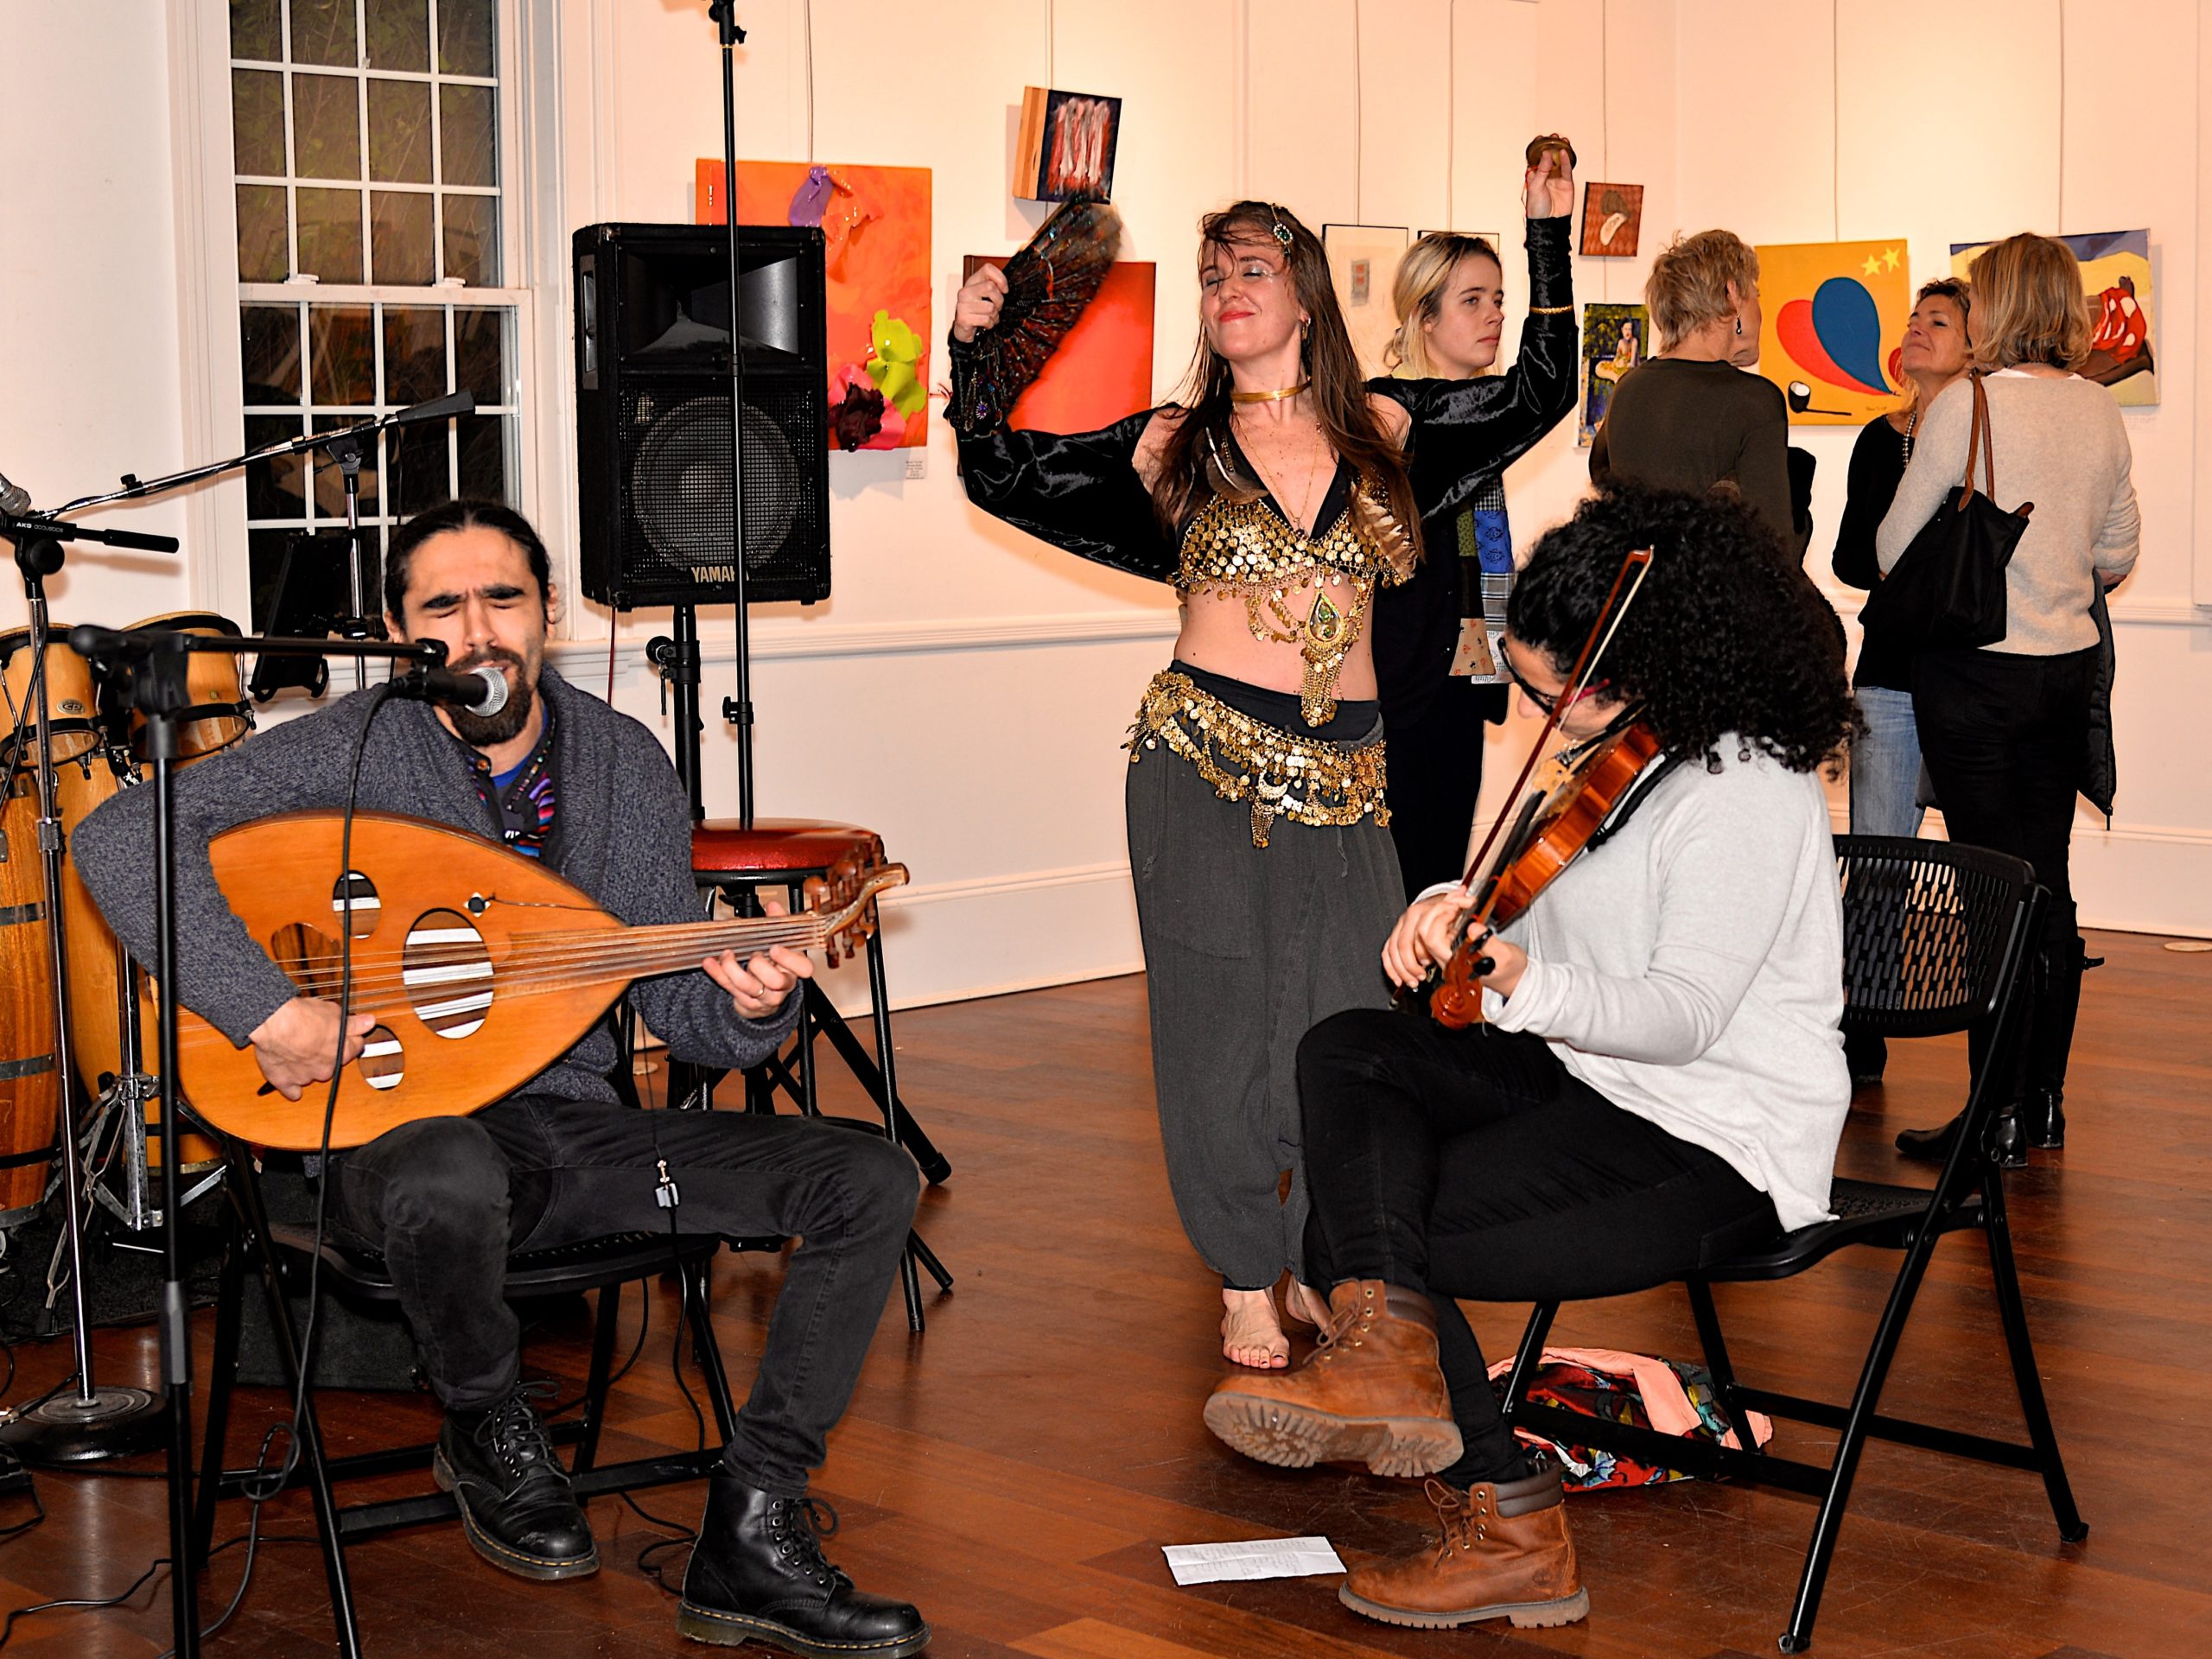 The Love And Passion art show, curated by Karyn Mannix, opened at Ashawagh Hall last weekend and featured art work, music, dancing and poetry. Molly Moonbeam dancing while the Al Hawili Band plays. KYRIL BROMLEY 